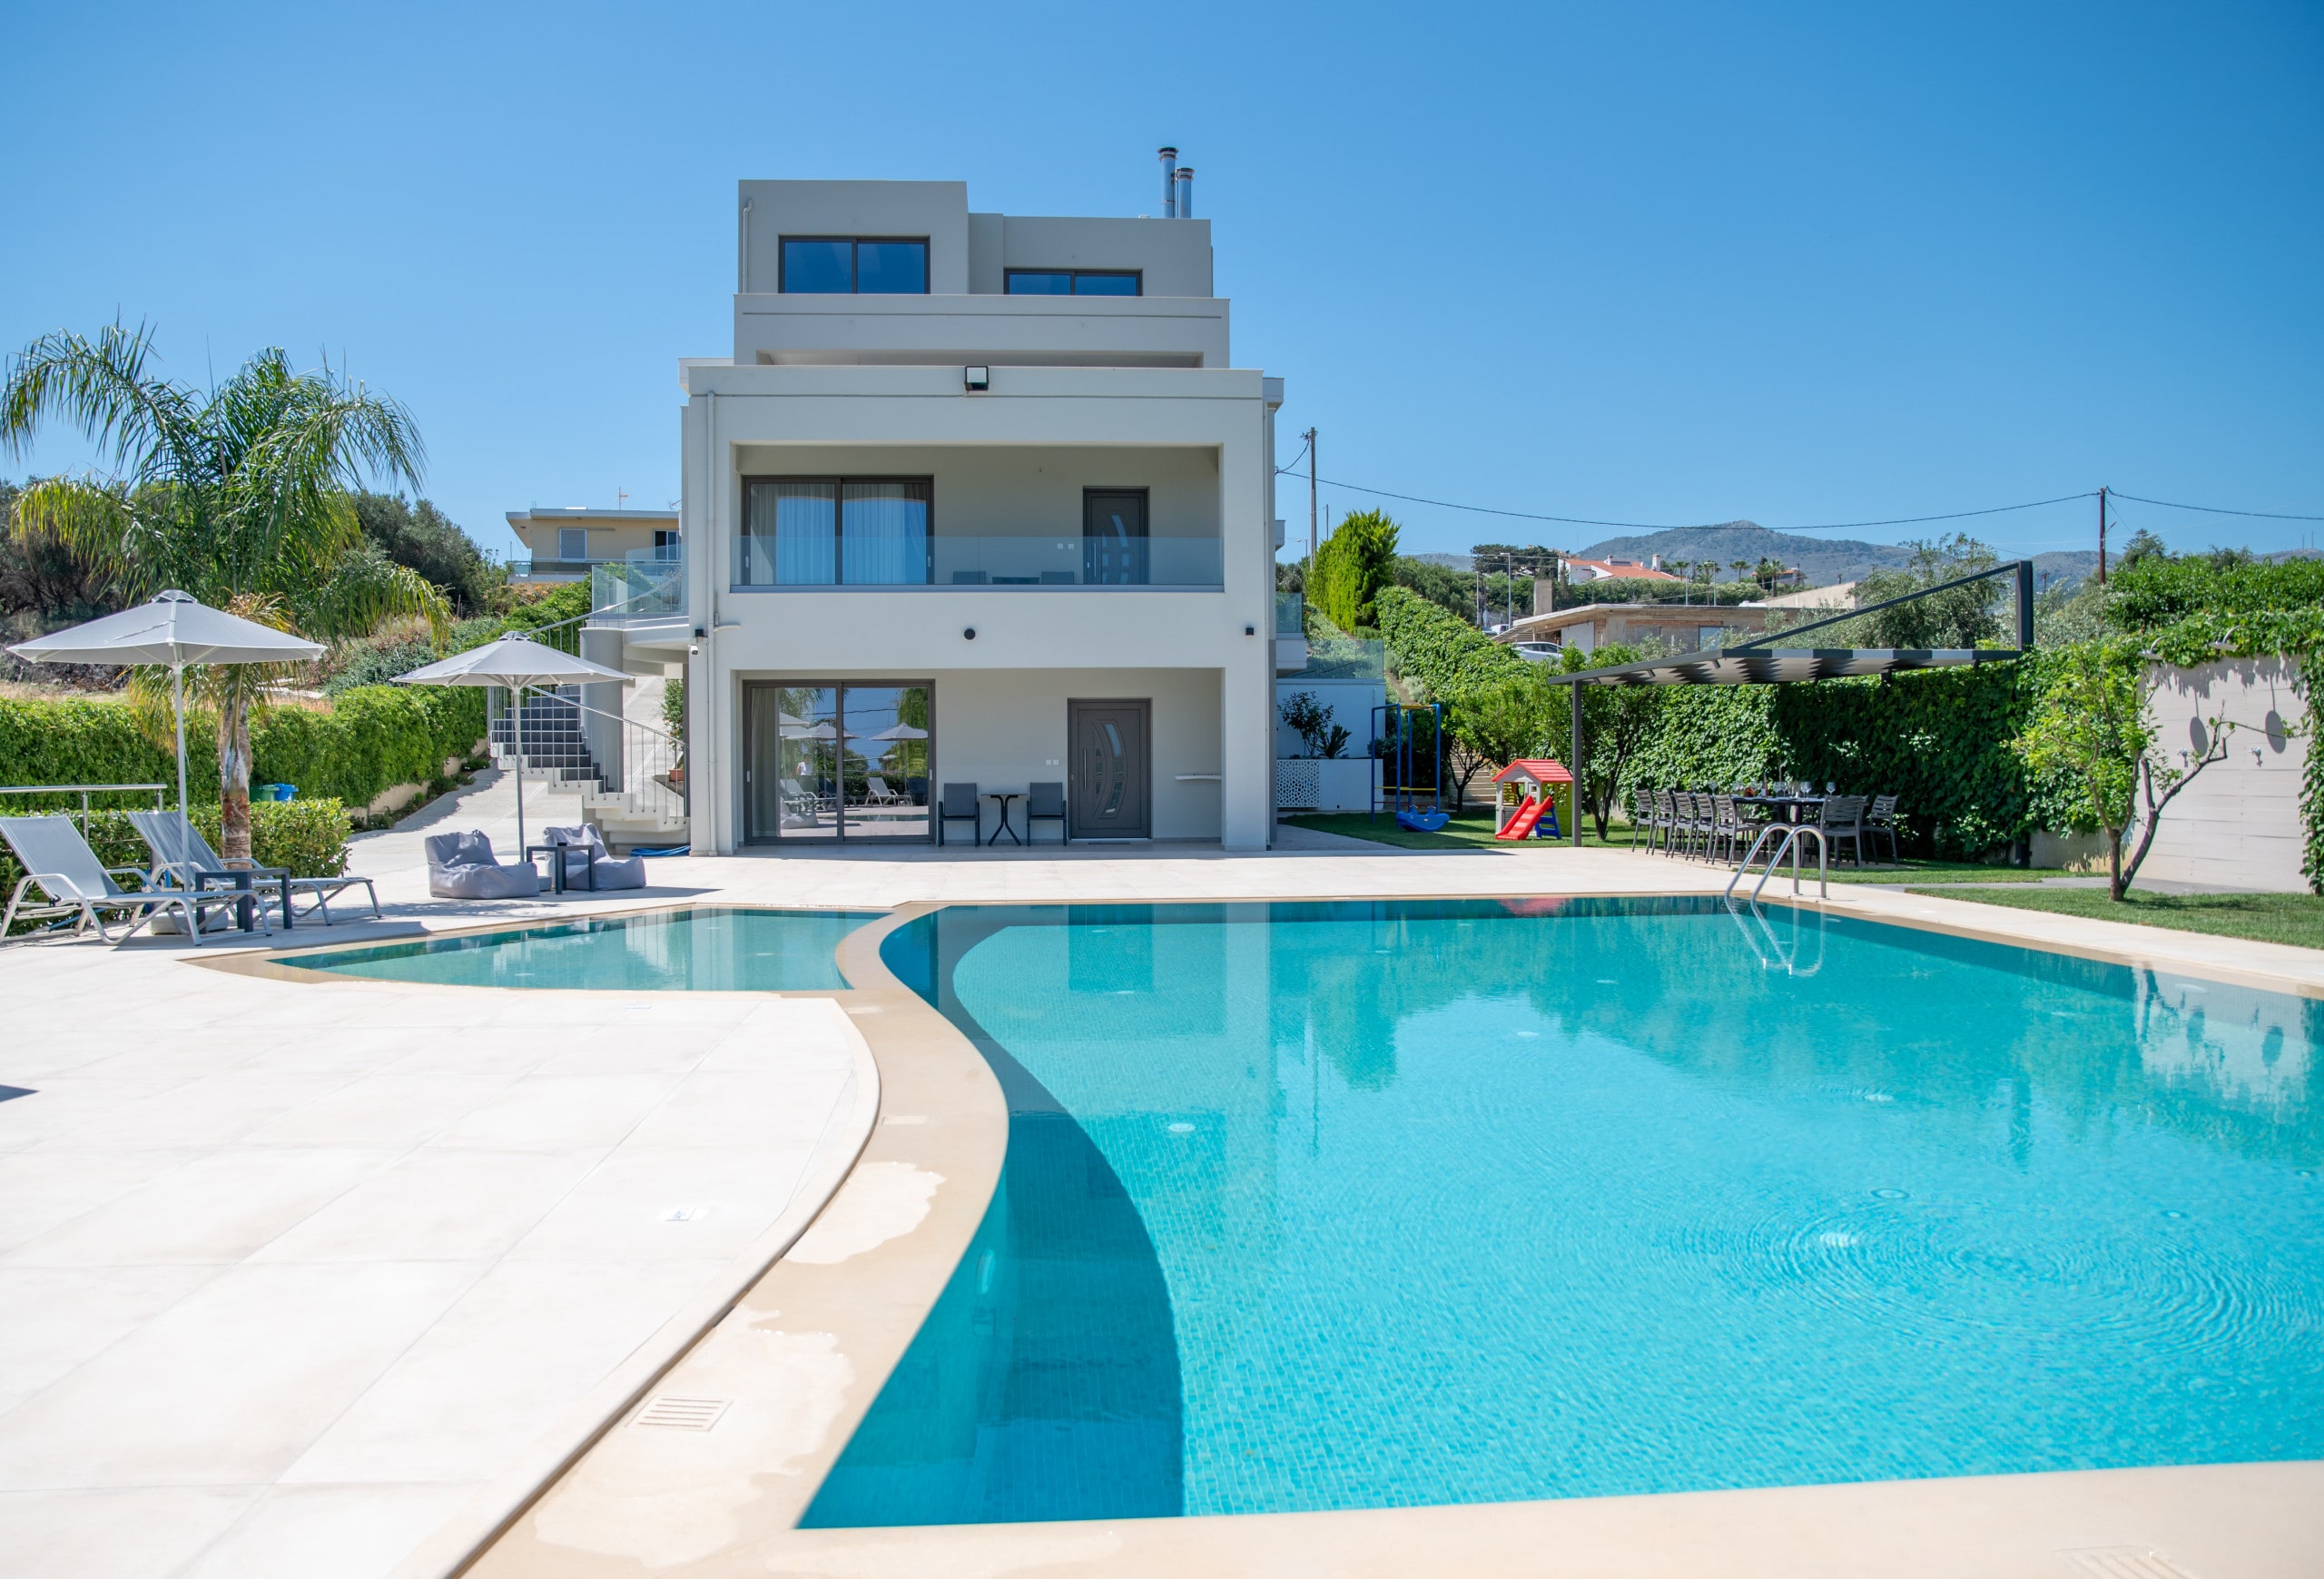 
Exterior view & private Swimming pool of Modern 3 apts Villa,Huge Swimming pool,Near all amenities,Rethymno,Crete,Greece